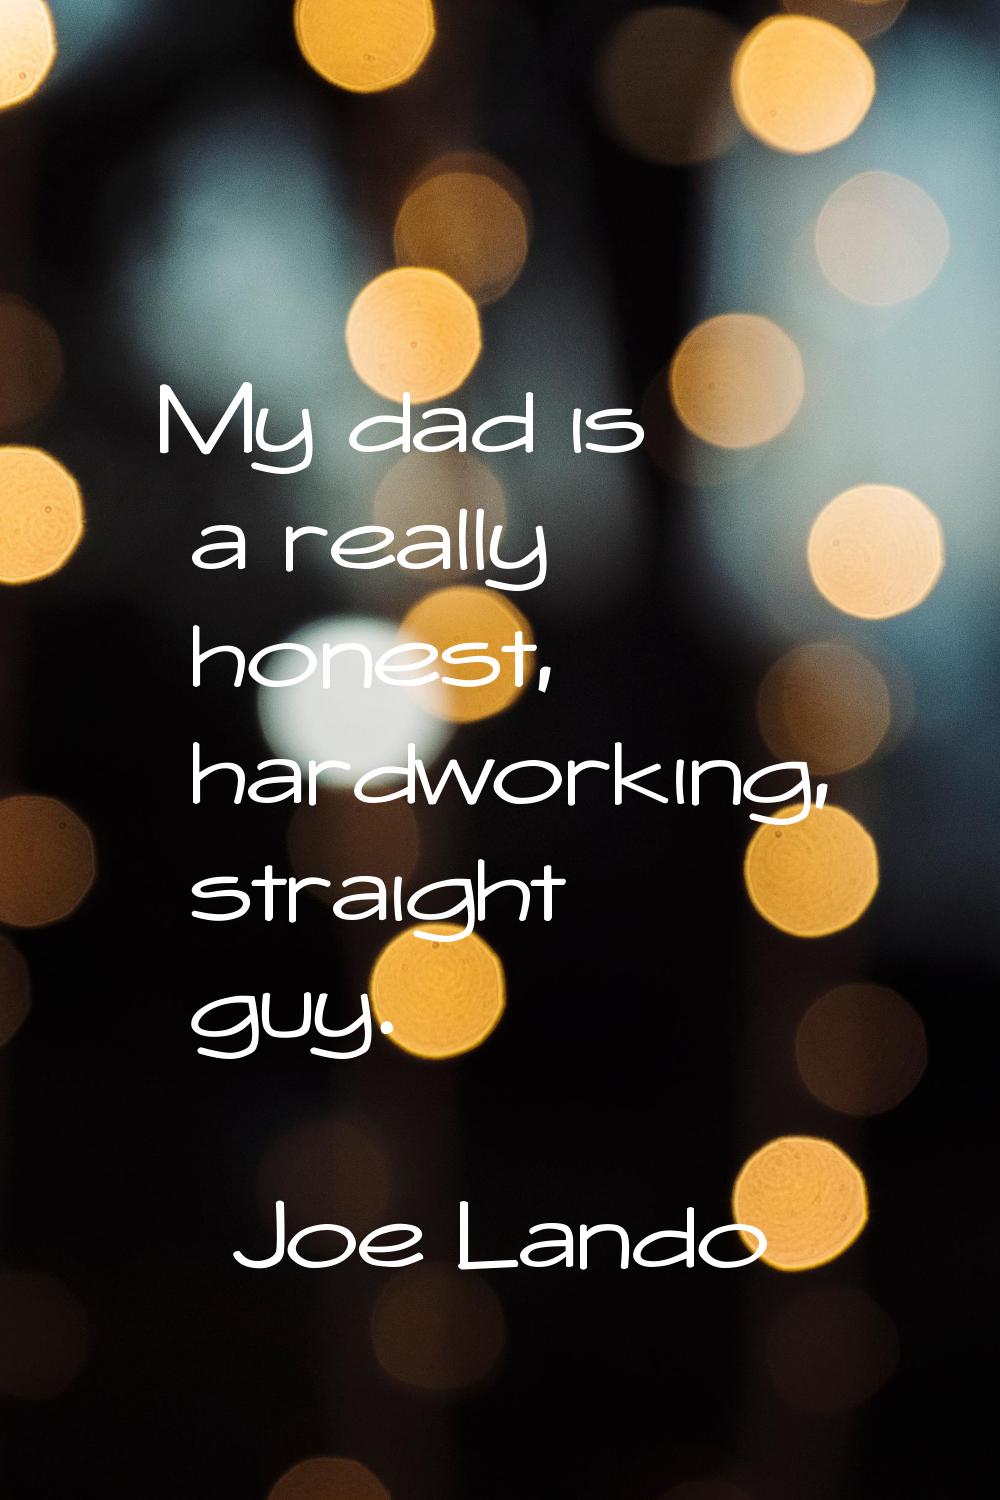 My dad is a really honest, hardworking, straight guy.